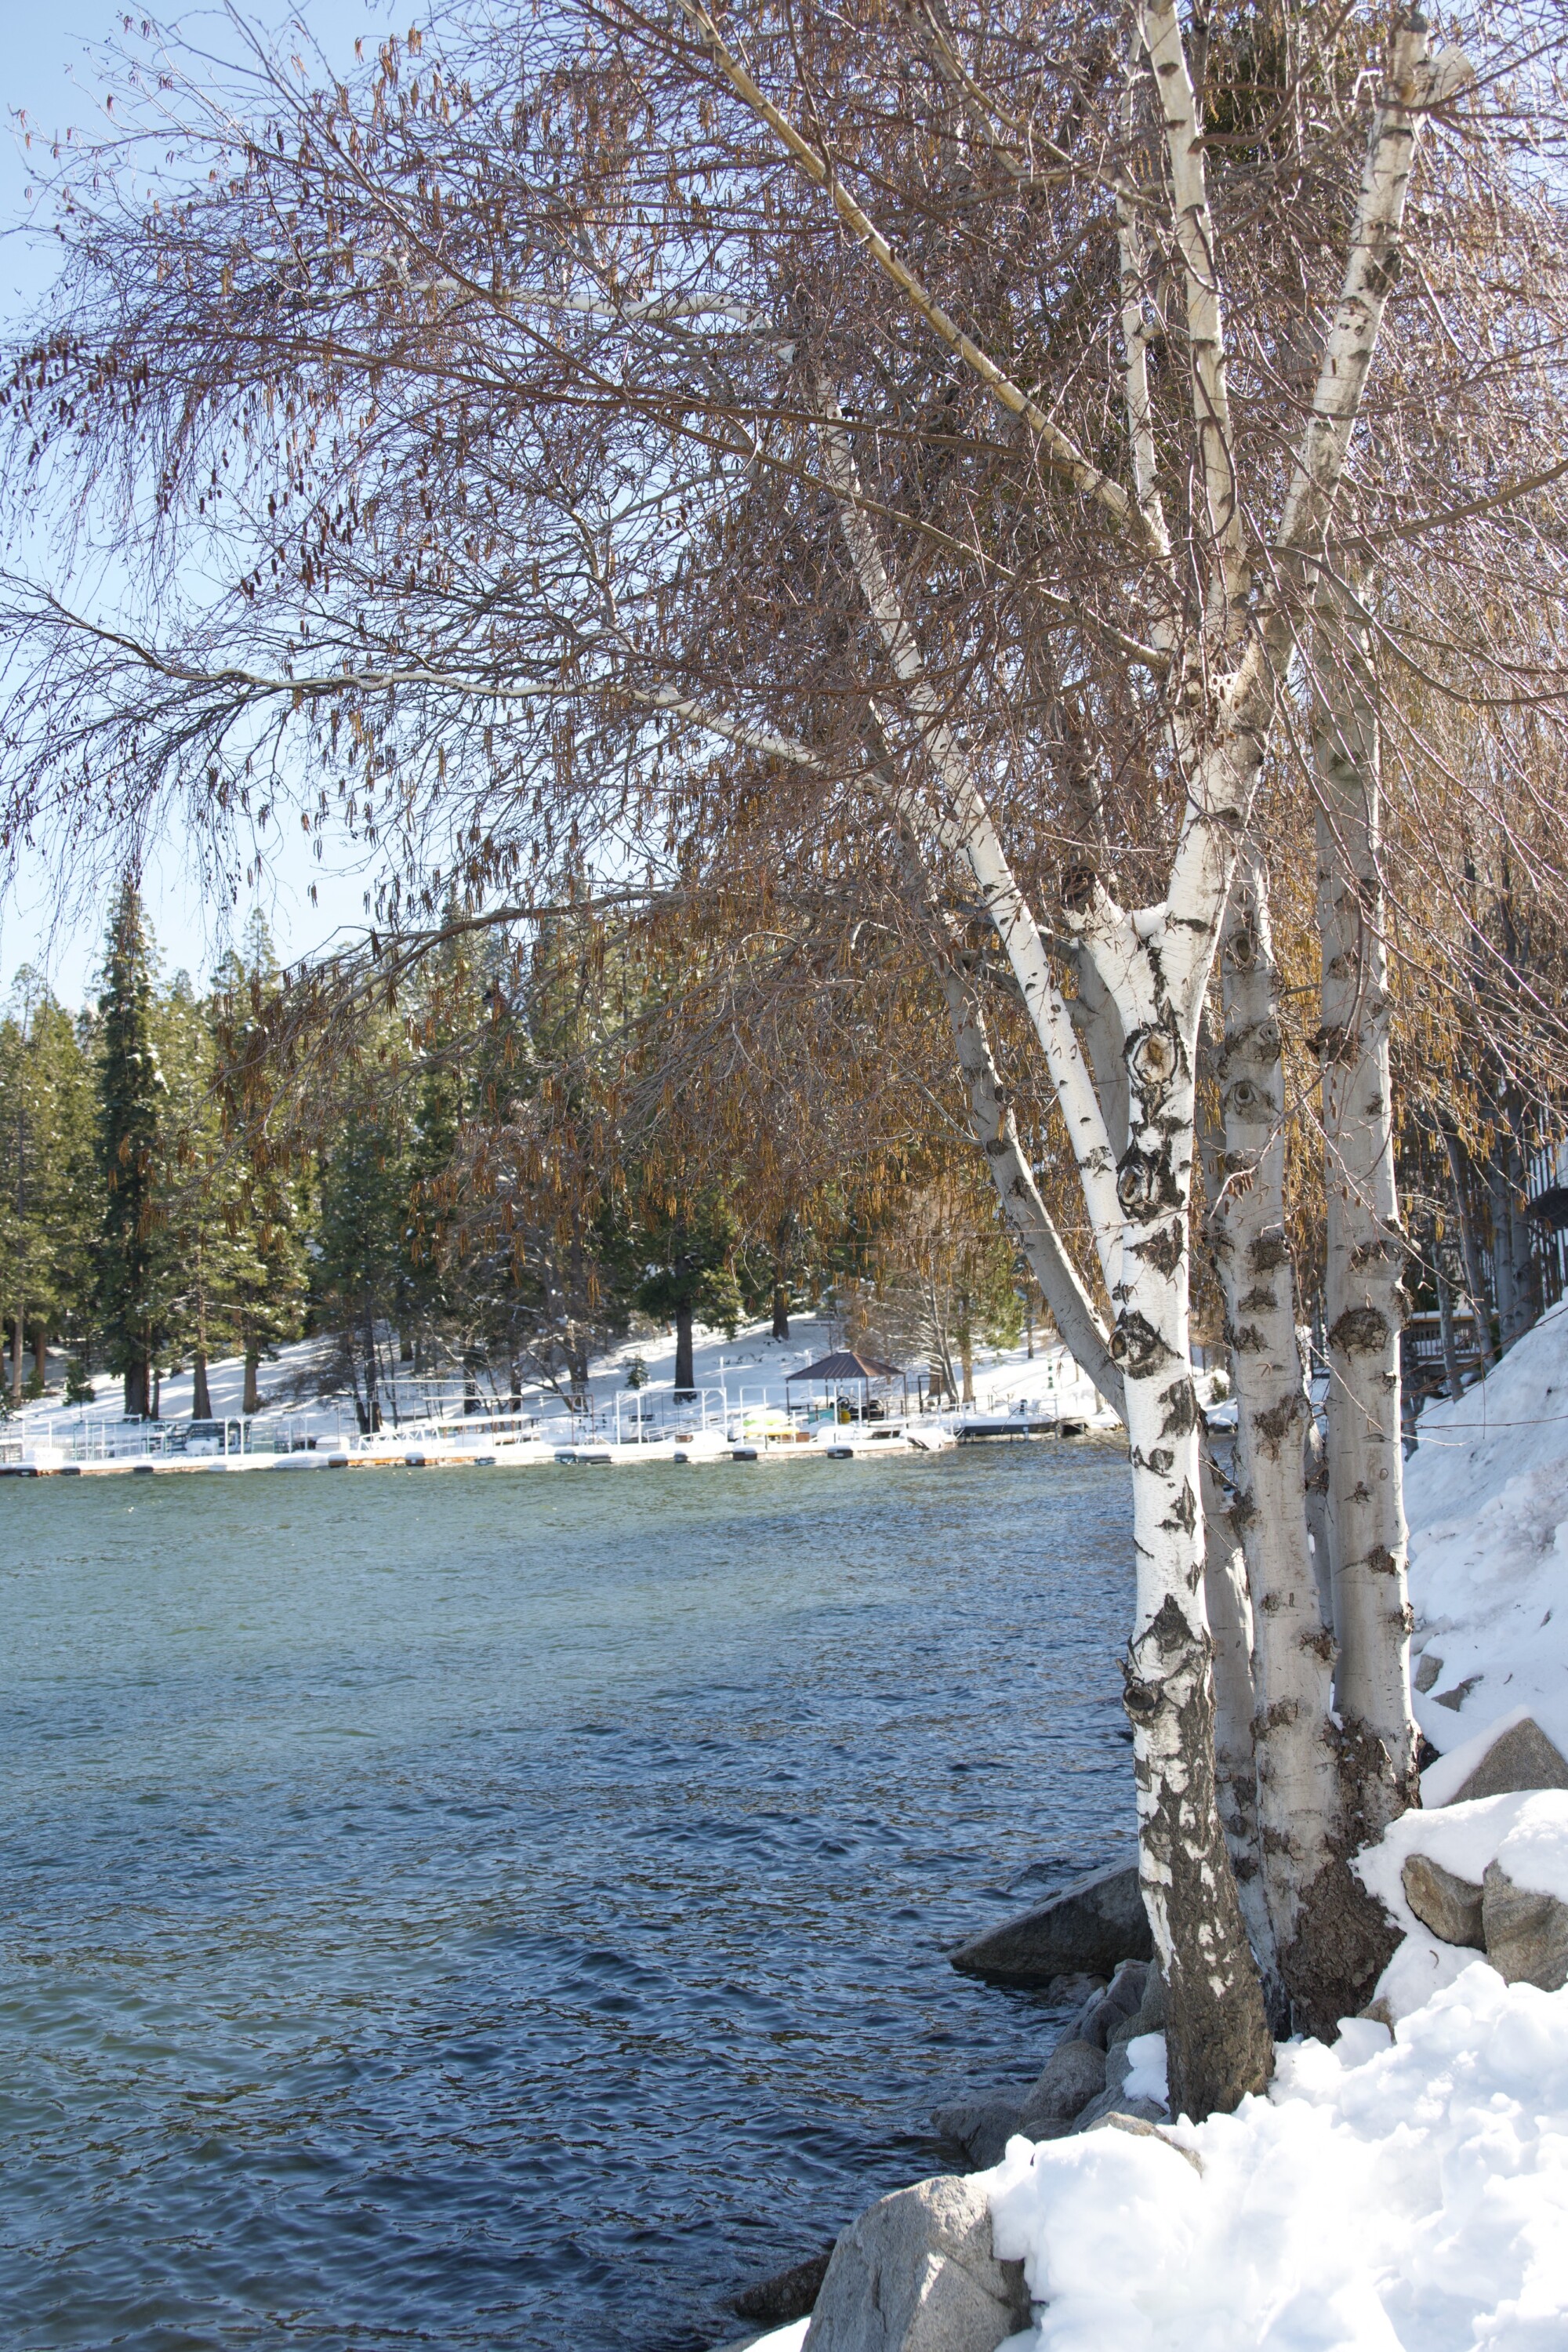 A grove of aspen trees with smooth white bark stand on a snowy shore beside a still lake surrounded by snow-capped mountains.